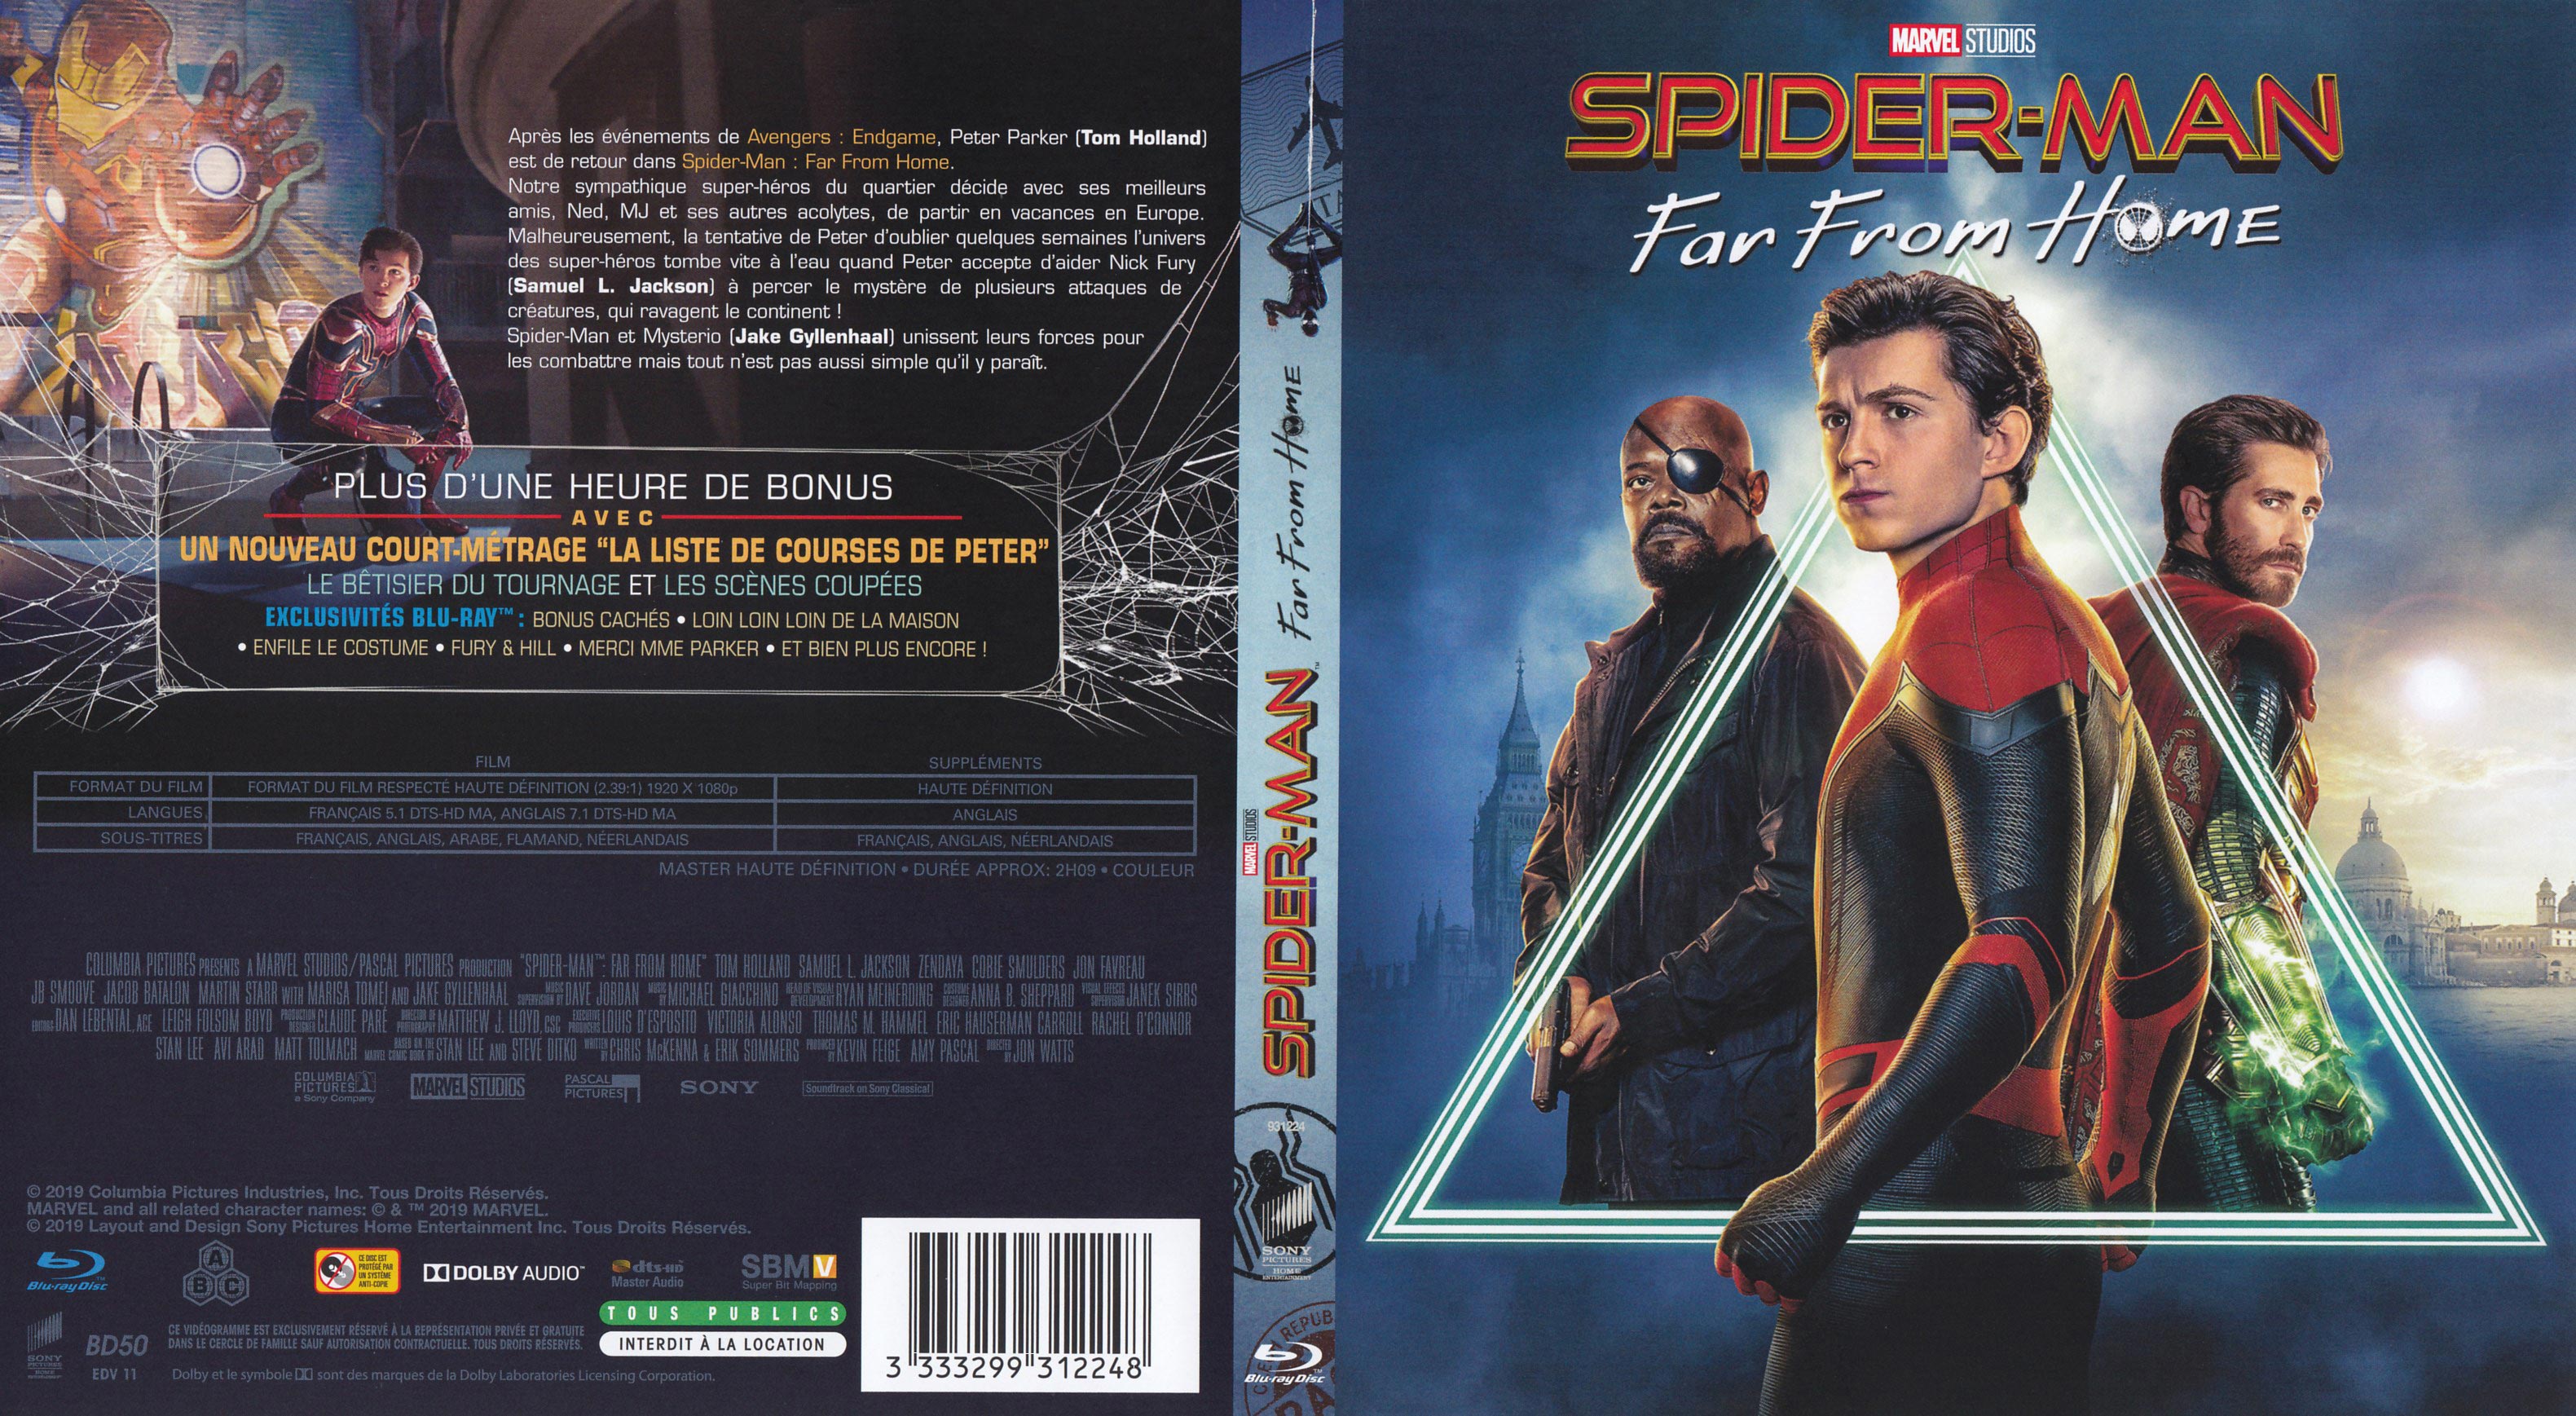 Jaquette Dvd De Spider Man Far From Home Blu Ray Cinéma Passion